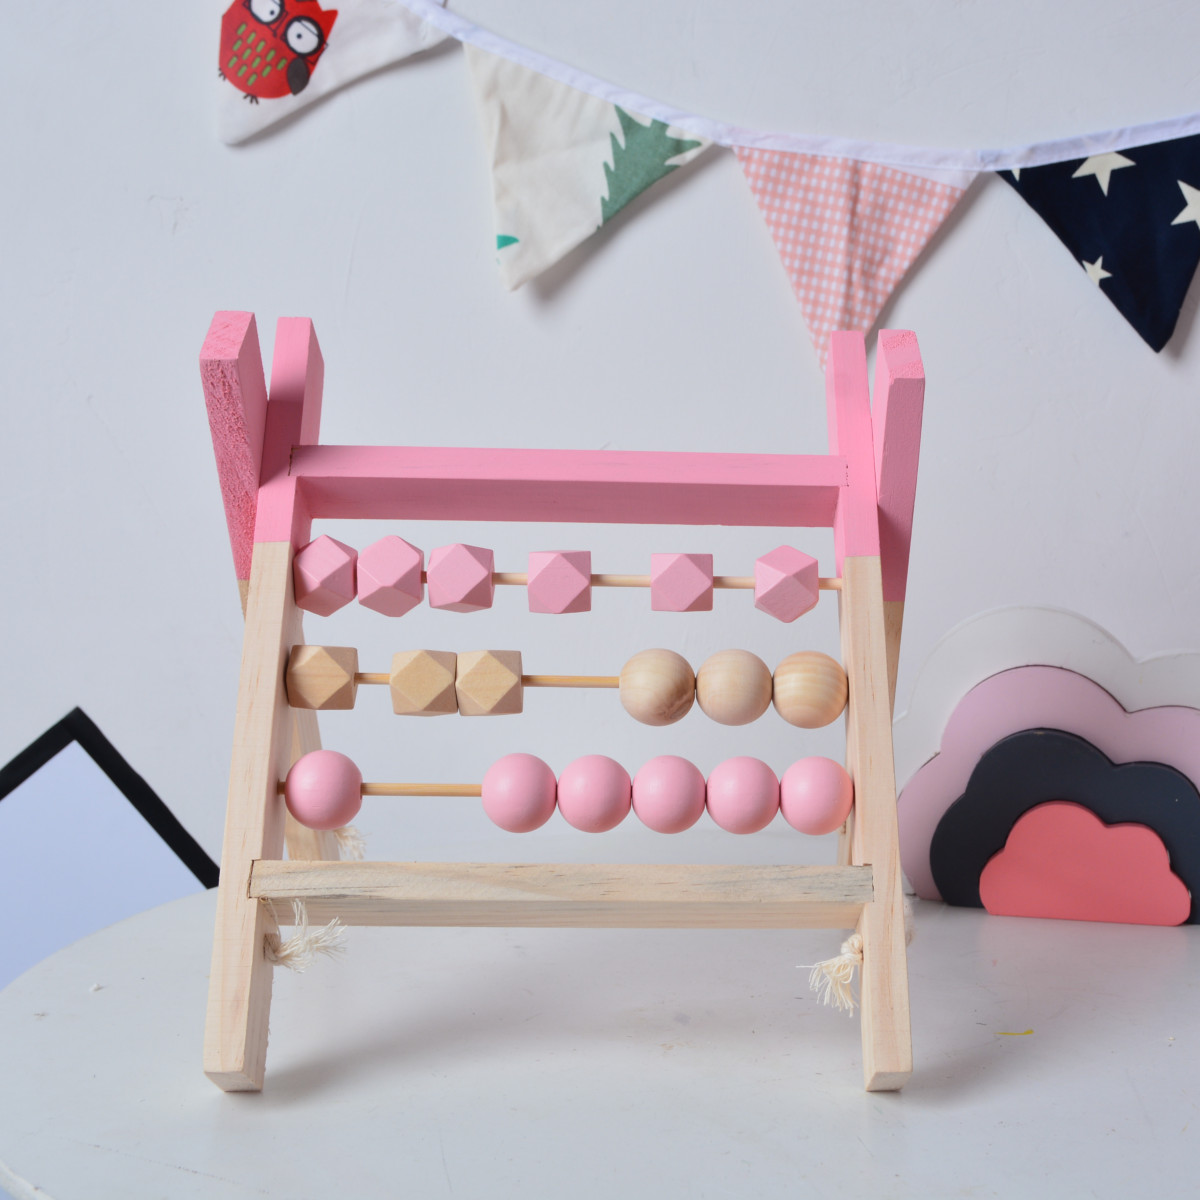 Natural-Pine-Nordic-Baby-Room-Decor-Wooden-Abacus-Educational-Nursery-Props-Toys-1581036-3